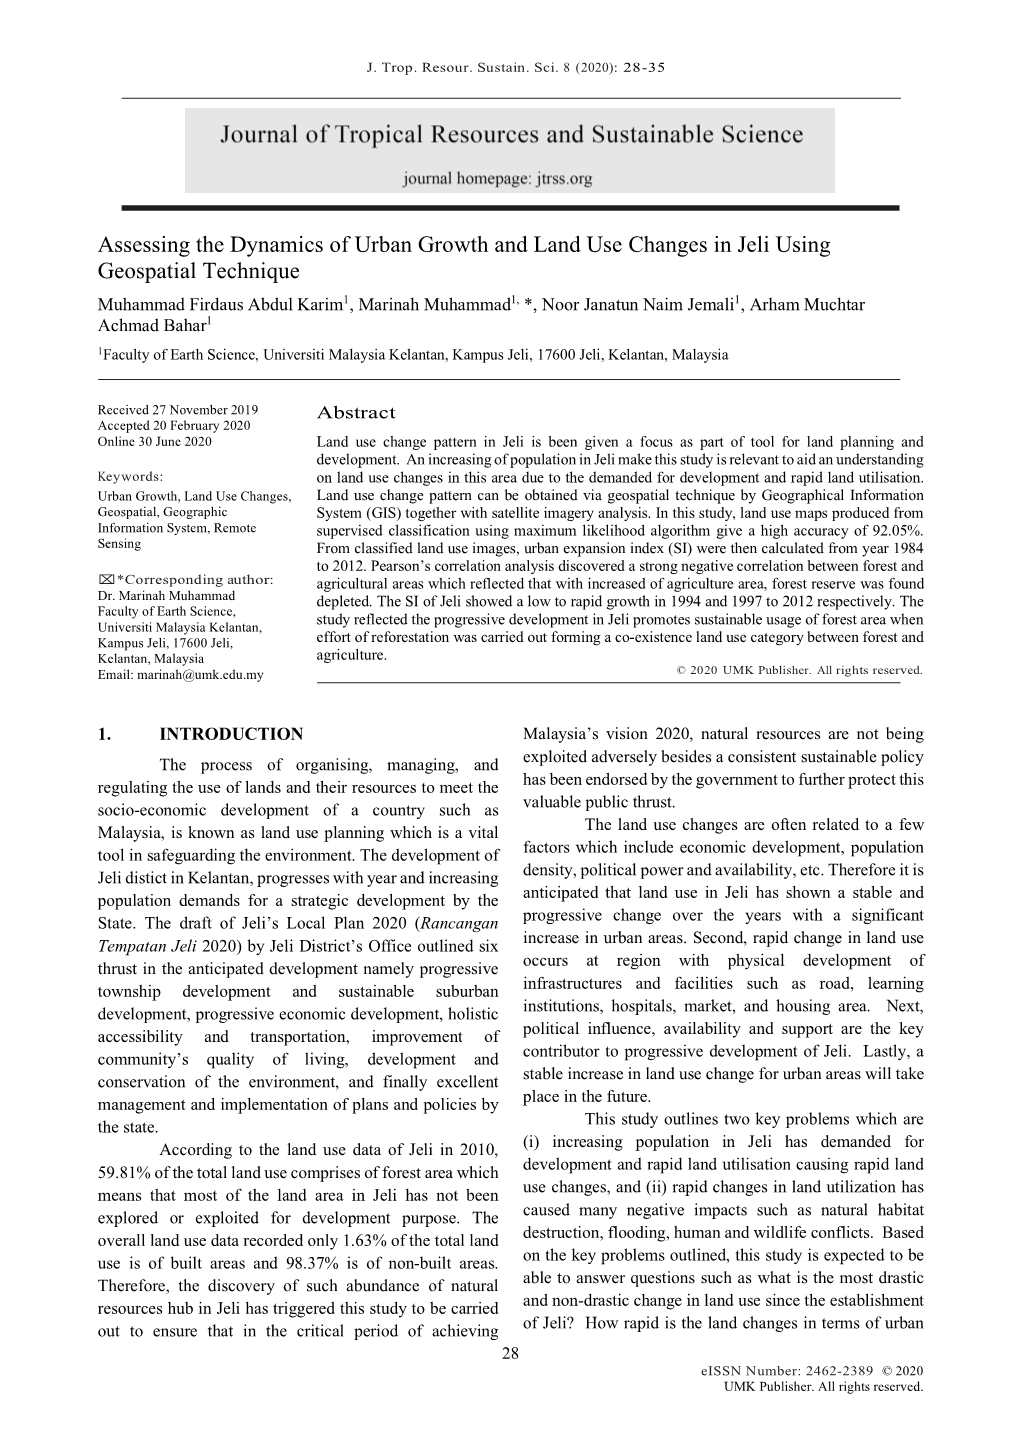 Assessing the Dynamics of Urban Growth and Land Use Changes In